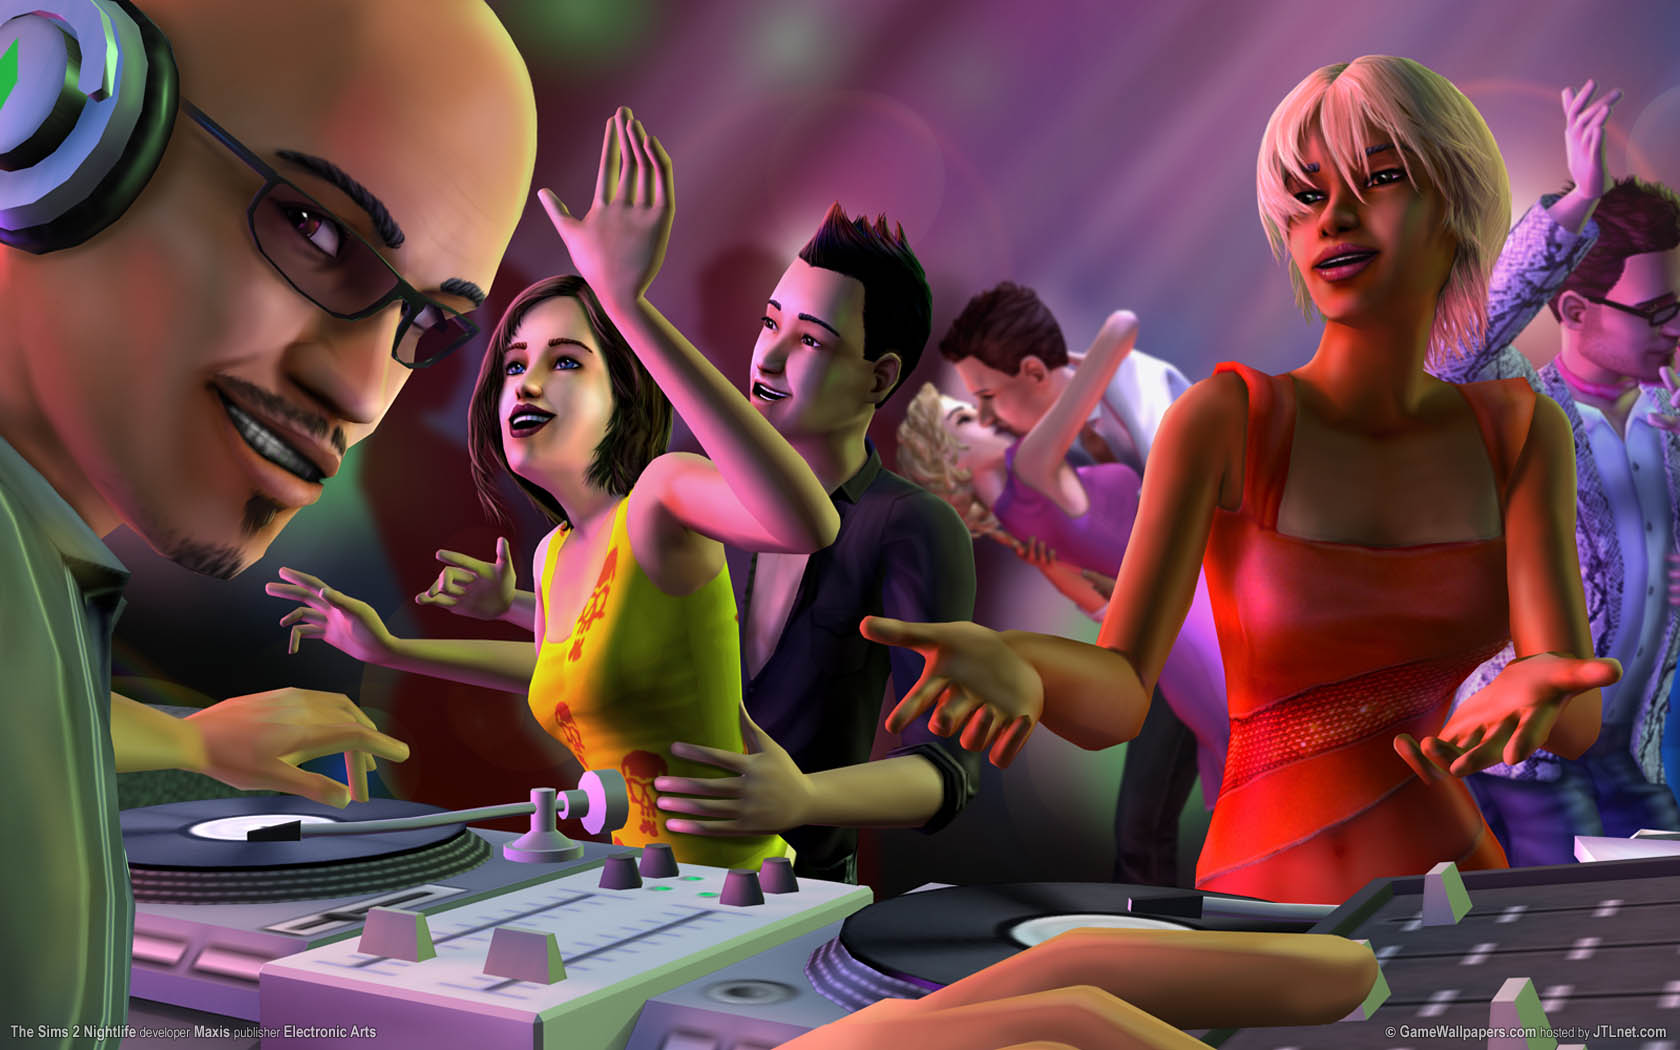 The Sims 2 Nightlife wallpaper 02 1680x1050